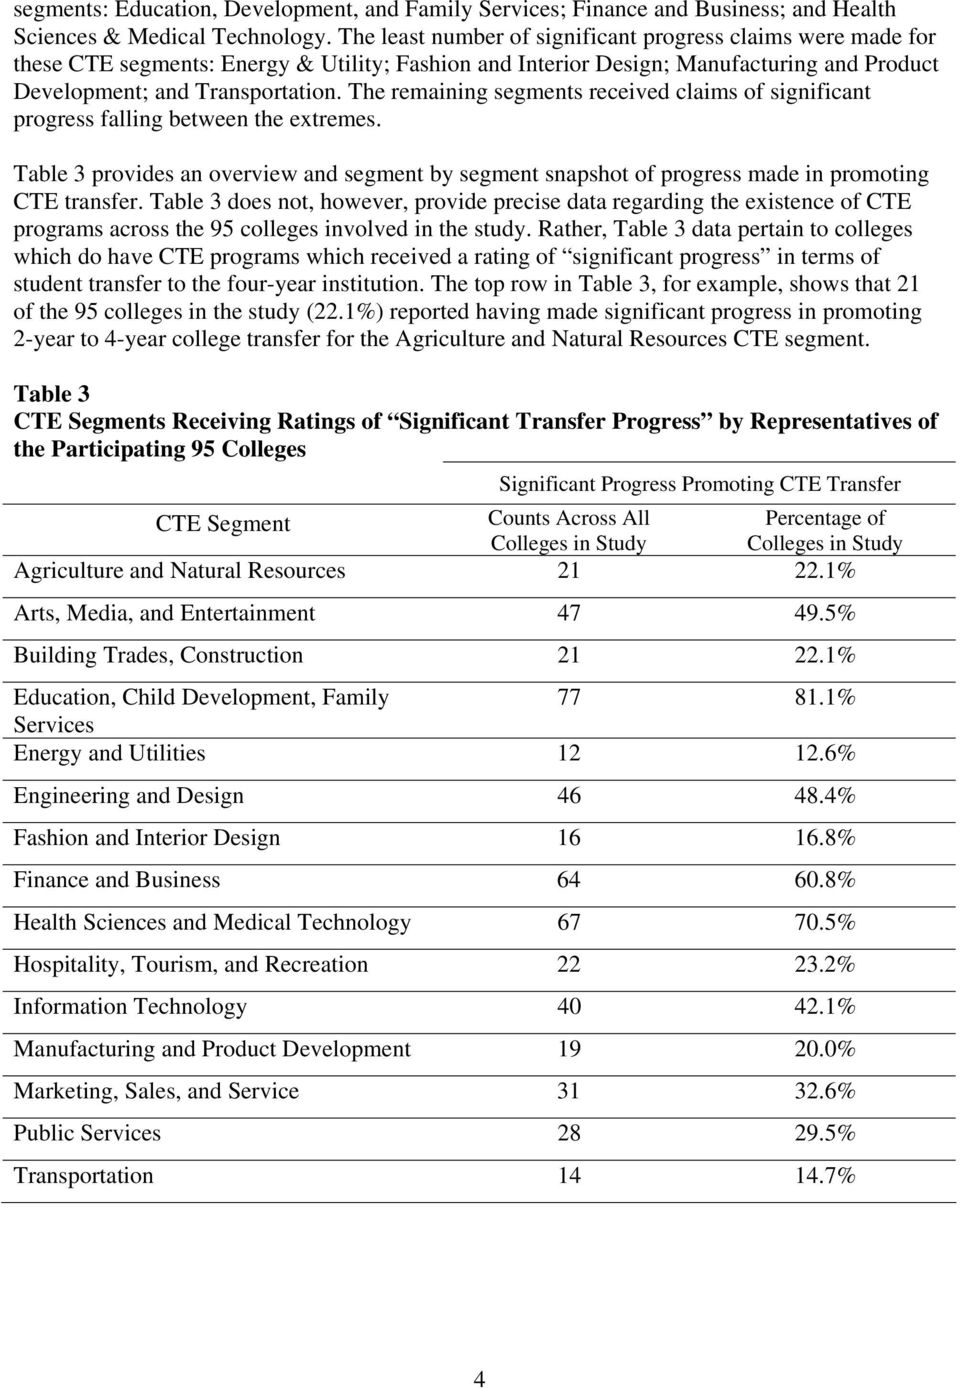 The remaining segments received claims of significant progress falling between the extremes. Table 3 provides an overview and segment by segment snapshot of progress made in promoting CTE transfer.